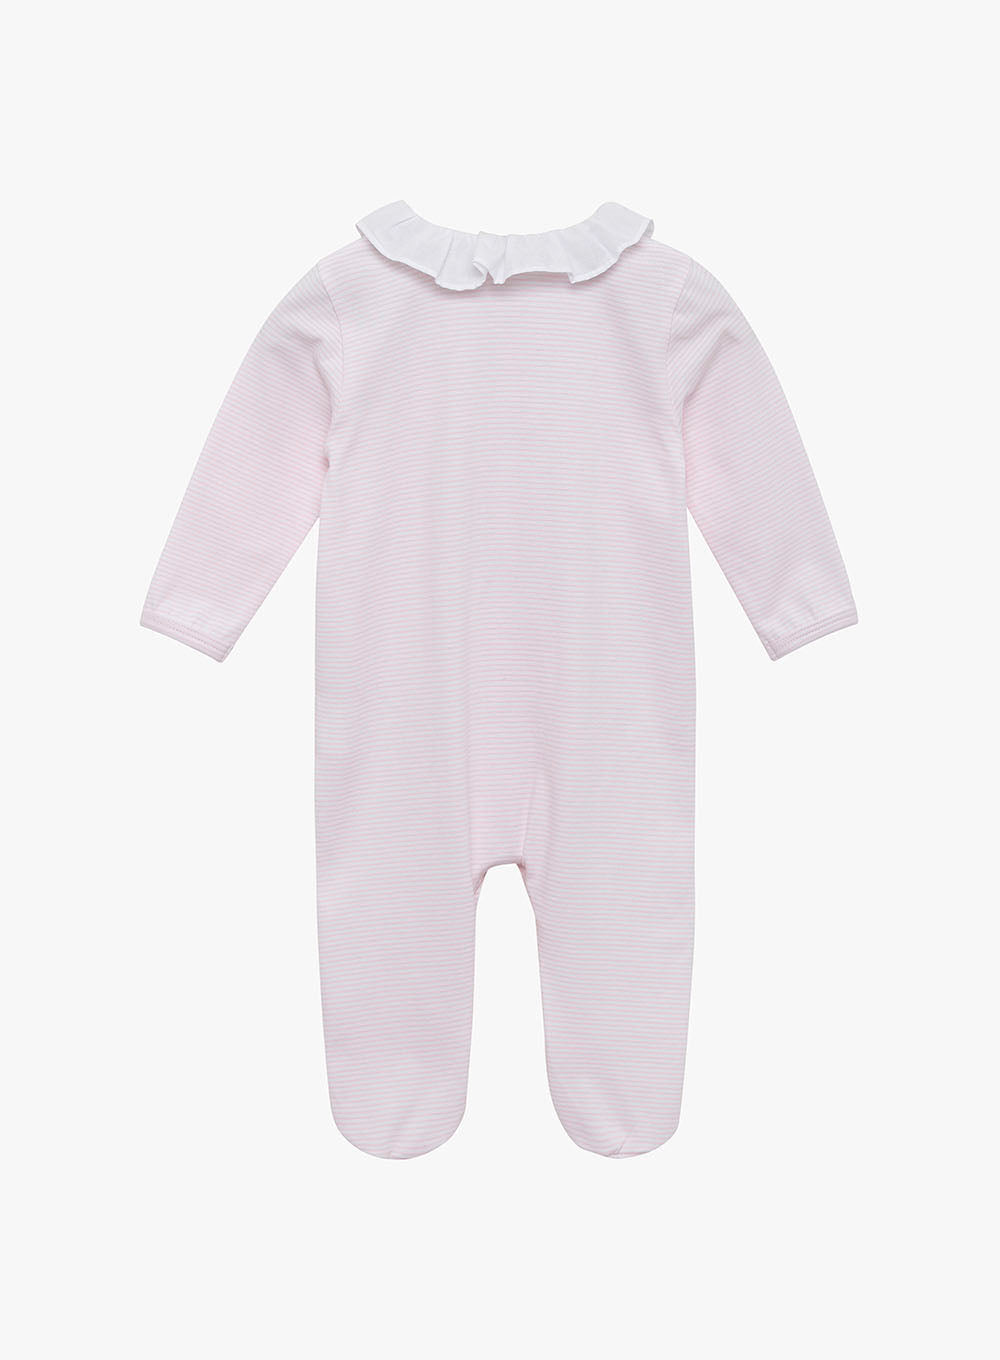 Baby Jemima Duck All-in-One Sleepsuit in Pink | Trotters